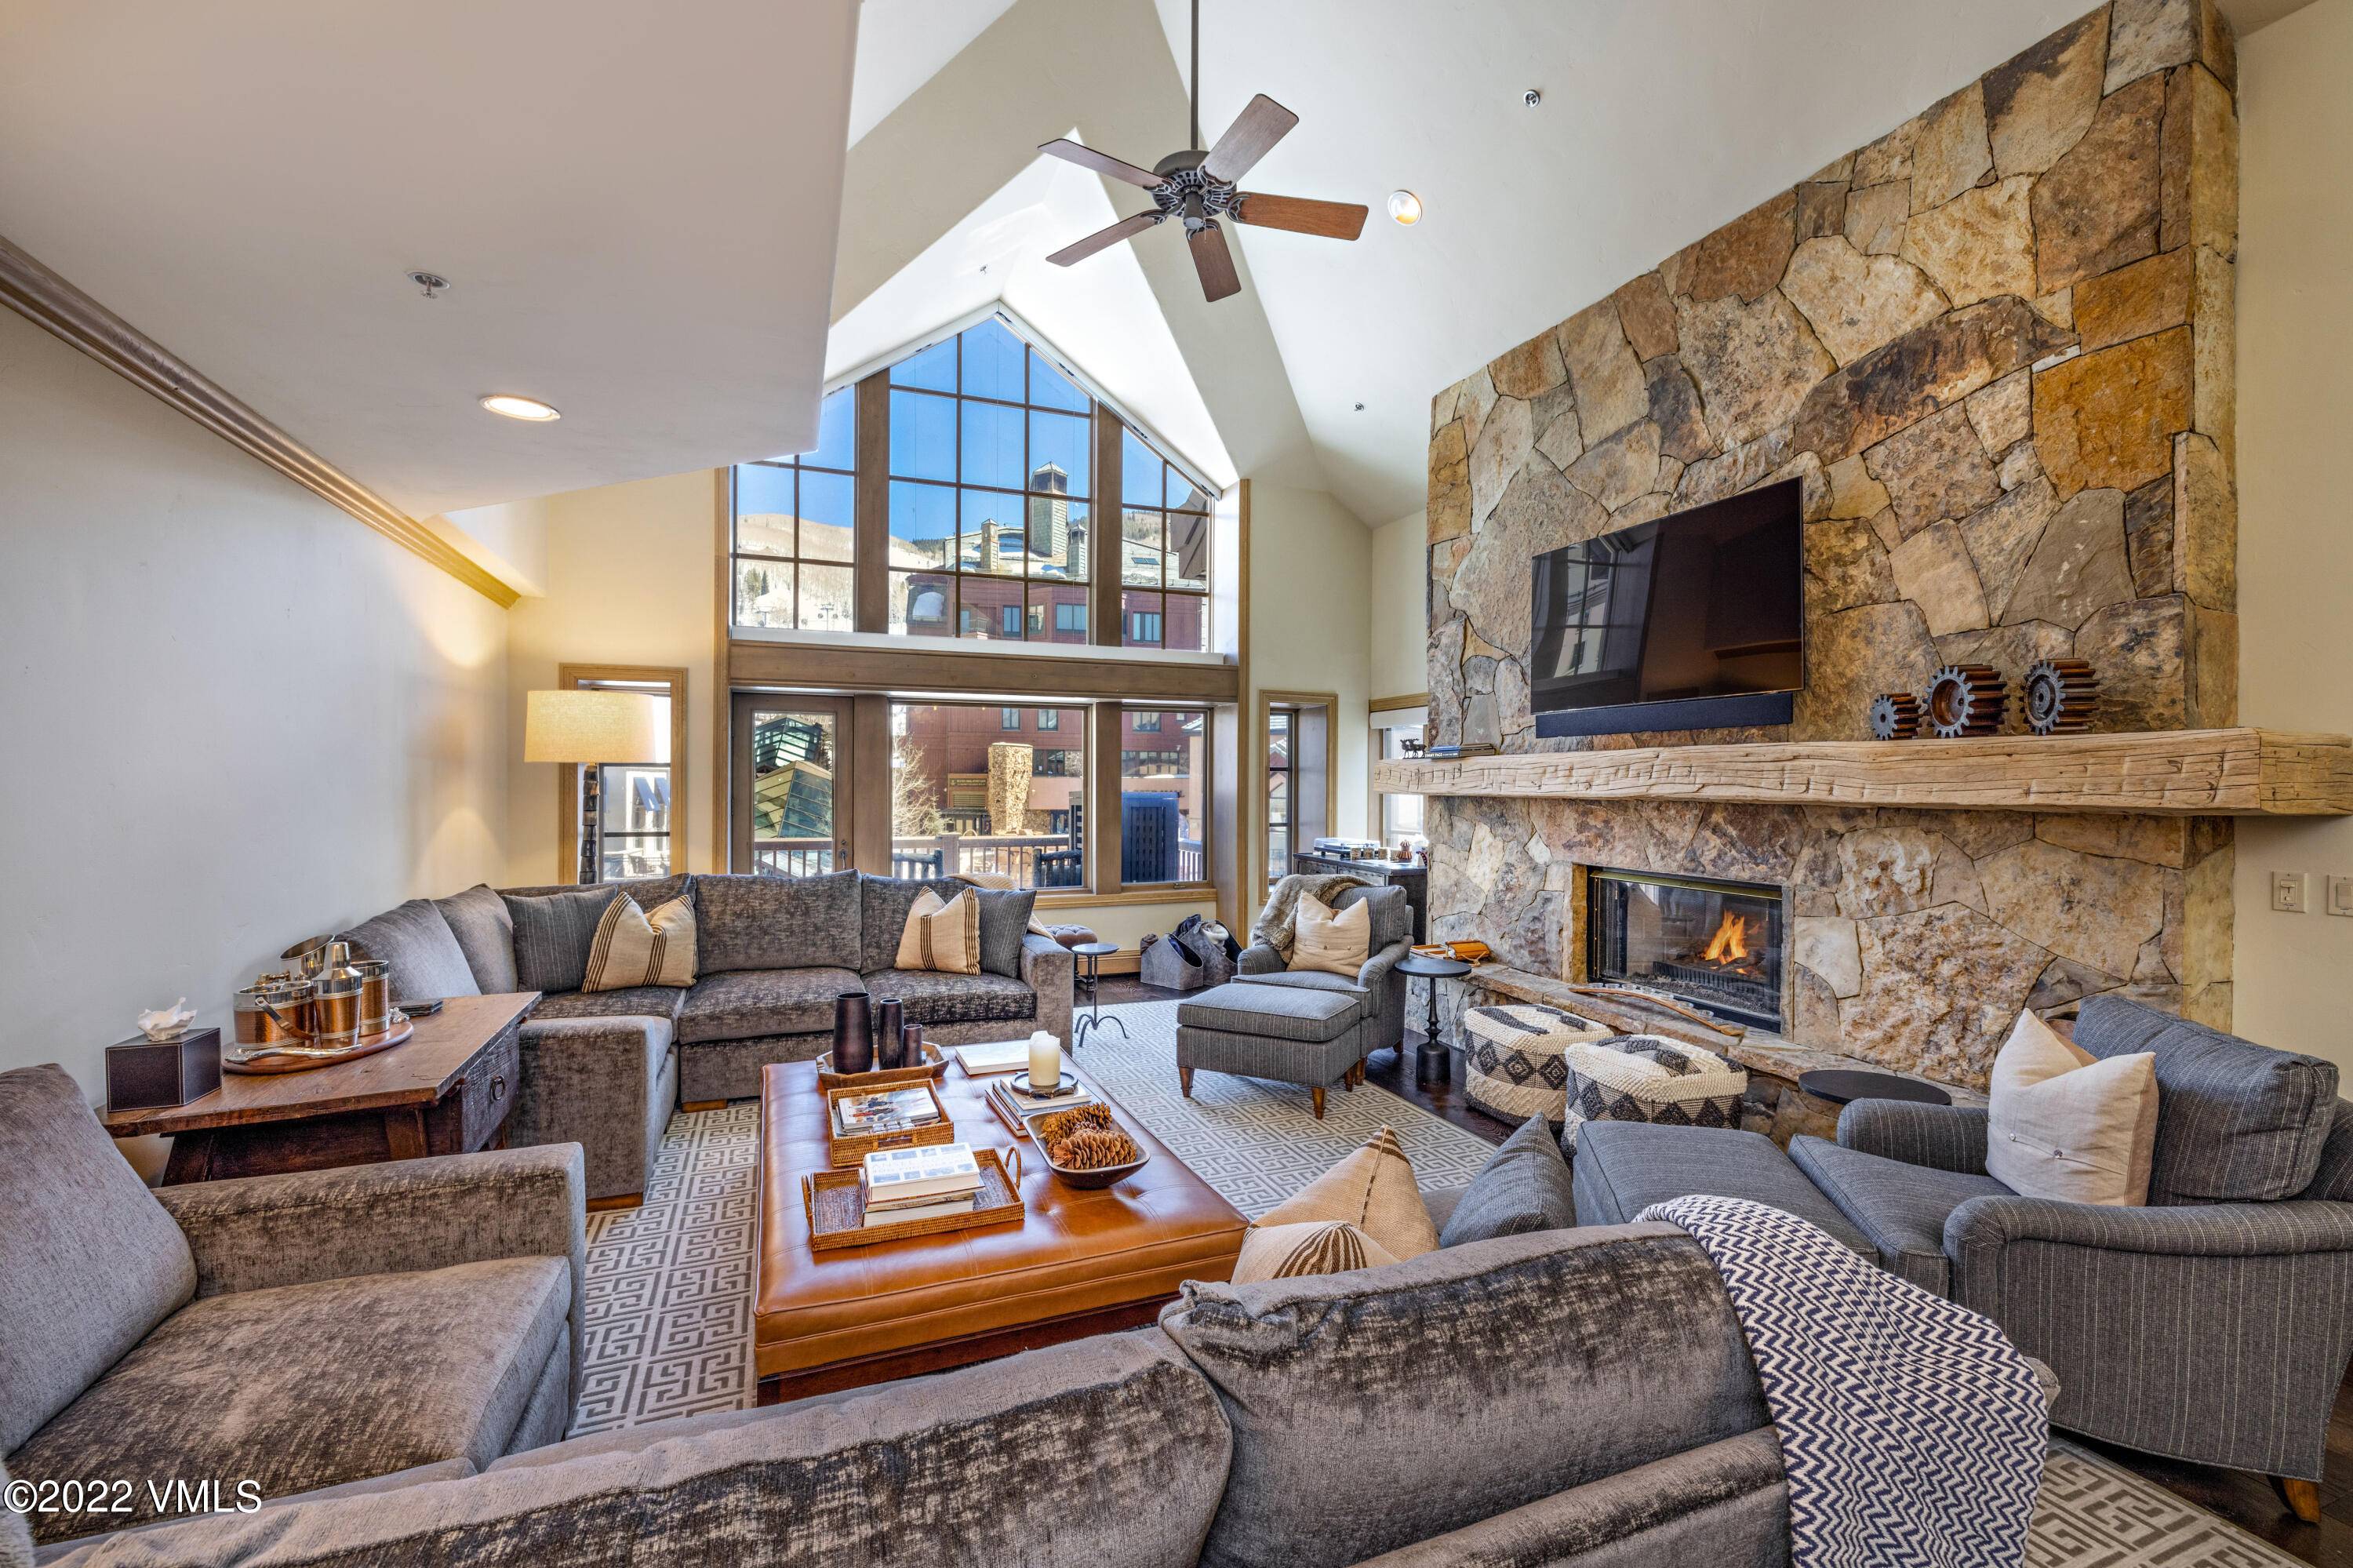 Recently remodeled, stunning penthouse located in the heart of Beaver Creek Village.